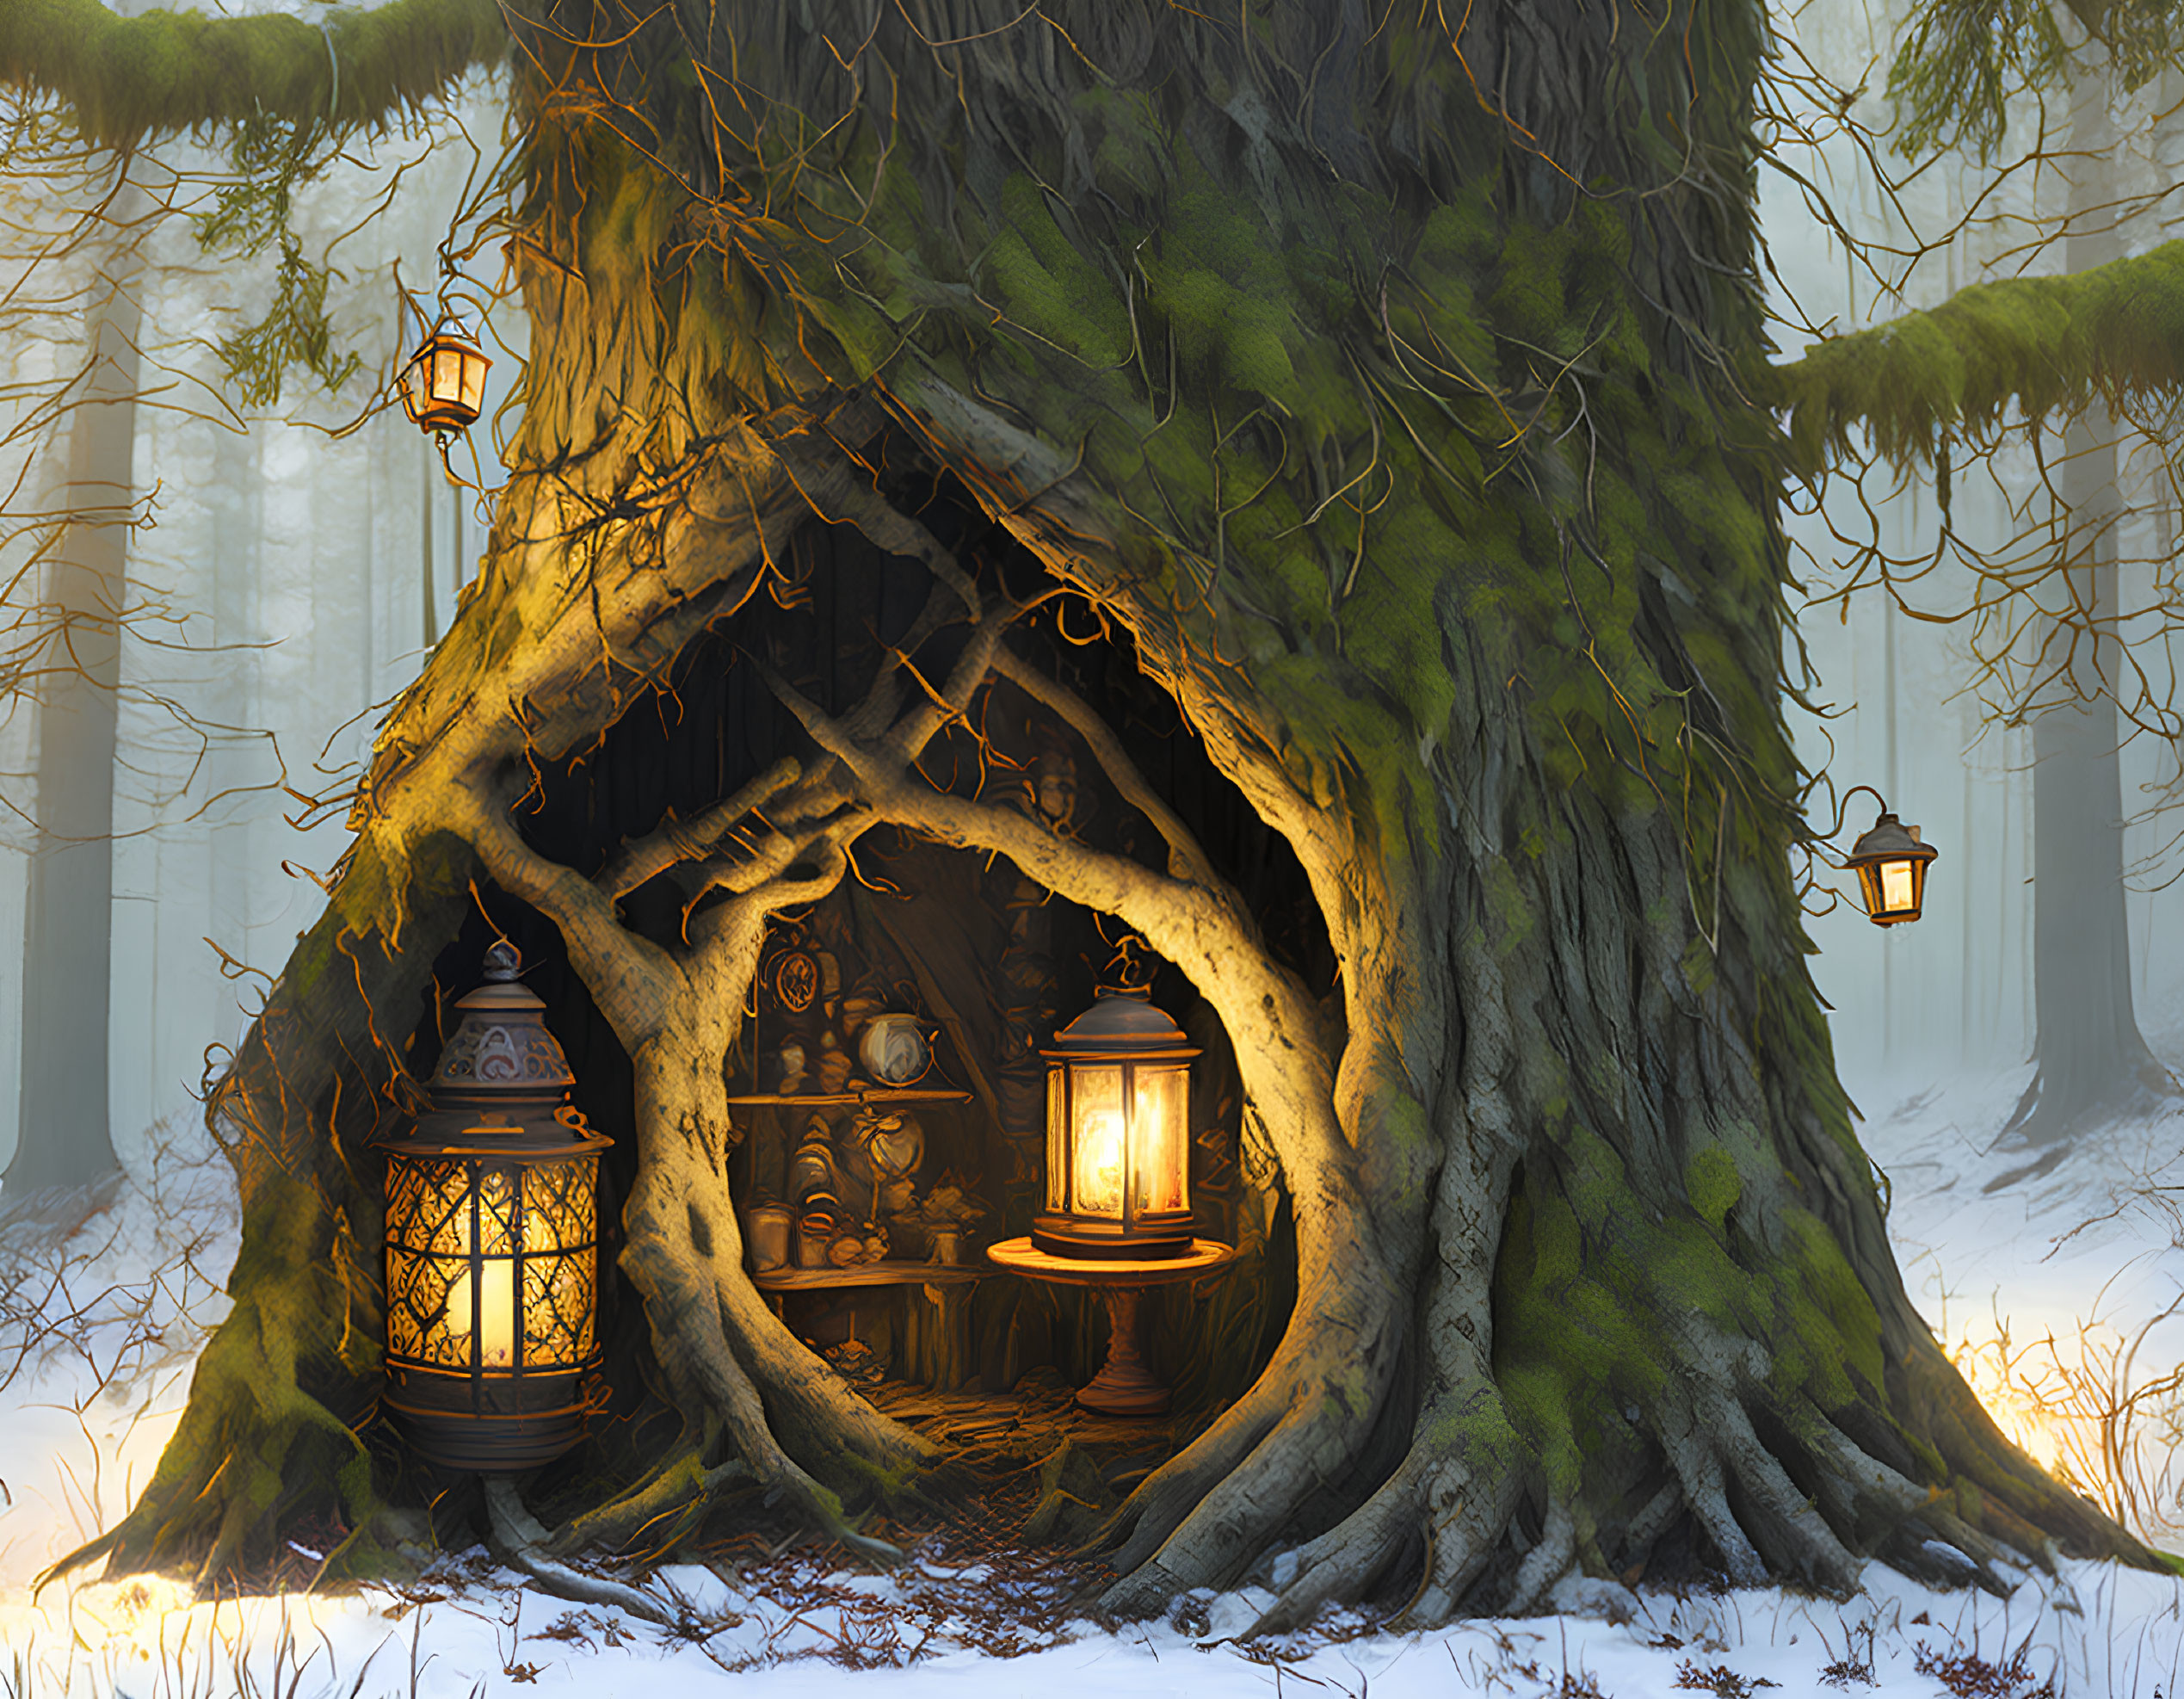 Enchanting tree hollow with cozy lantern-lit interior in mystical forest